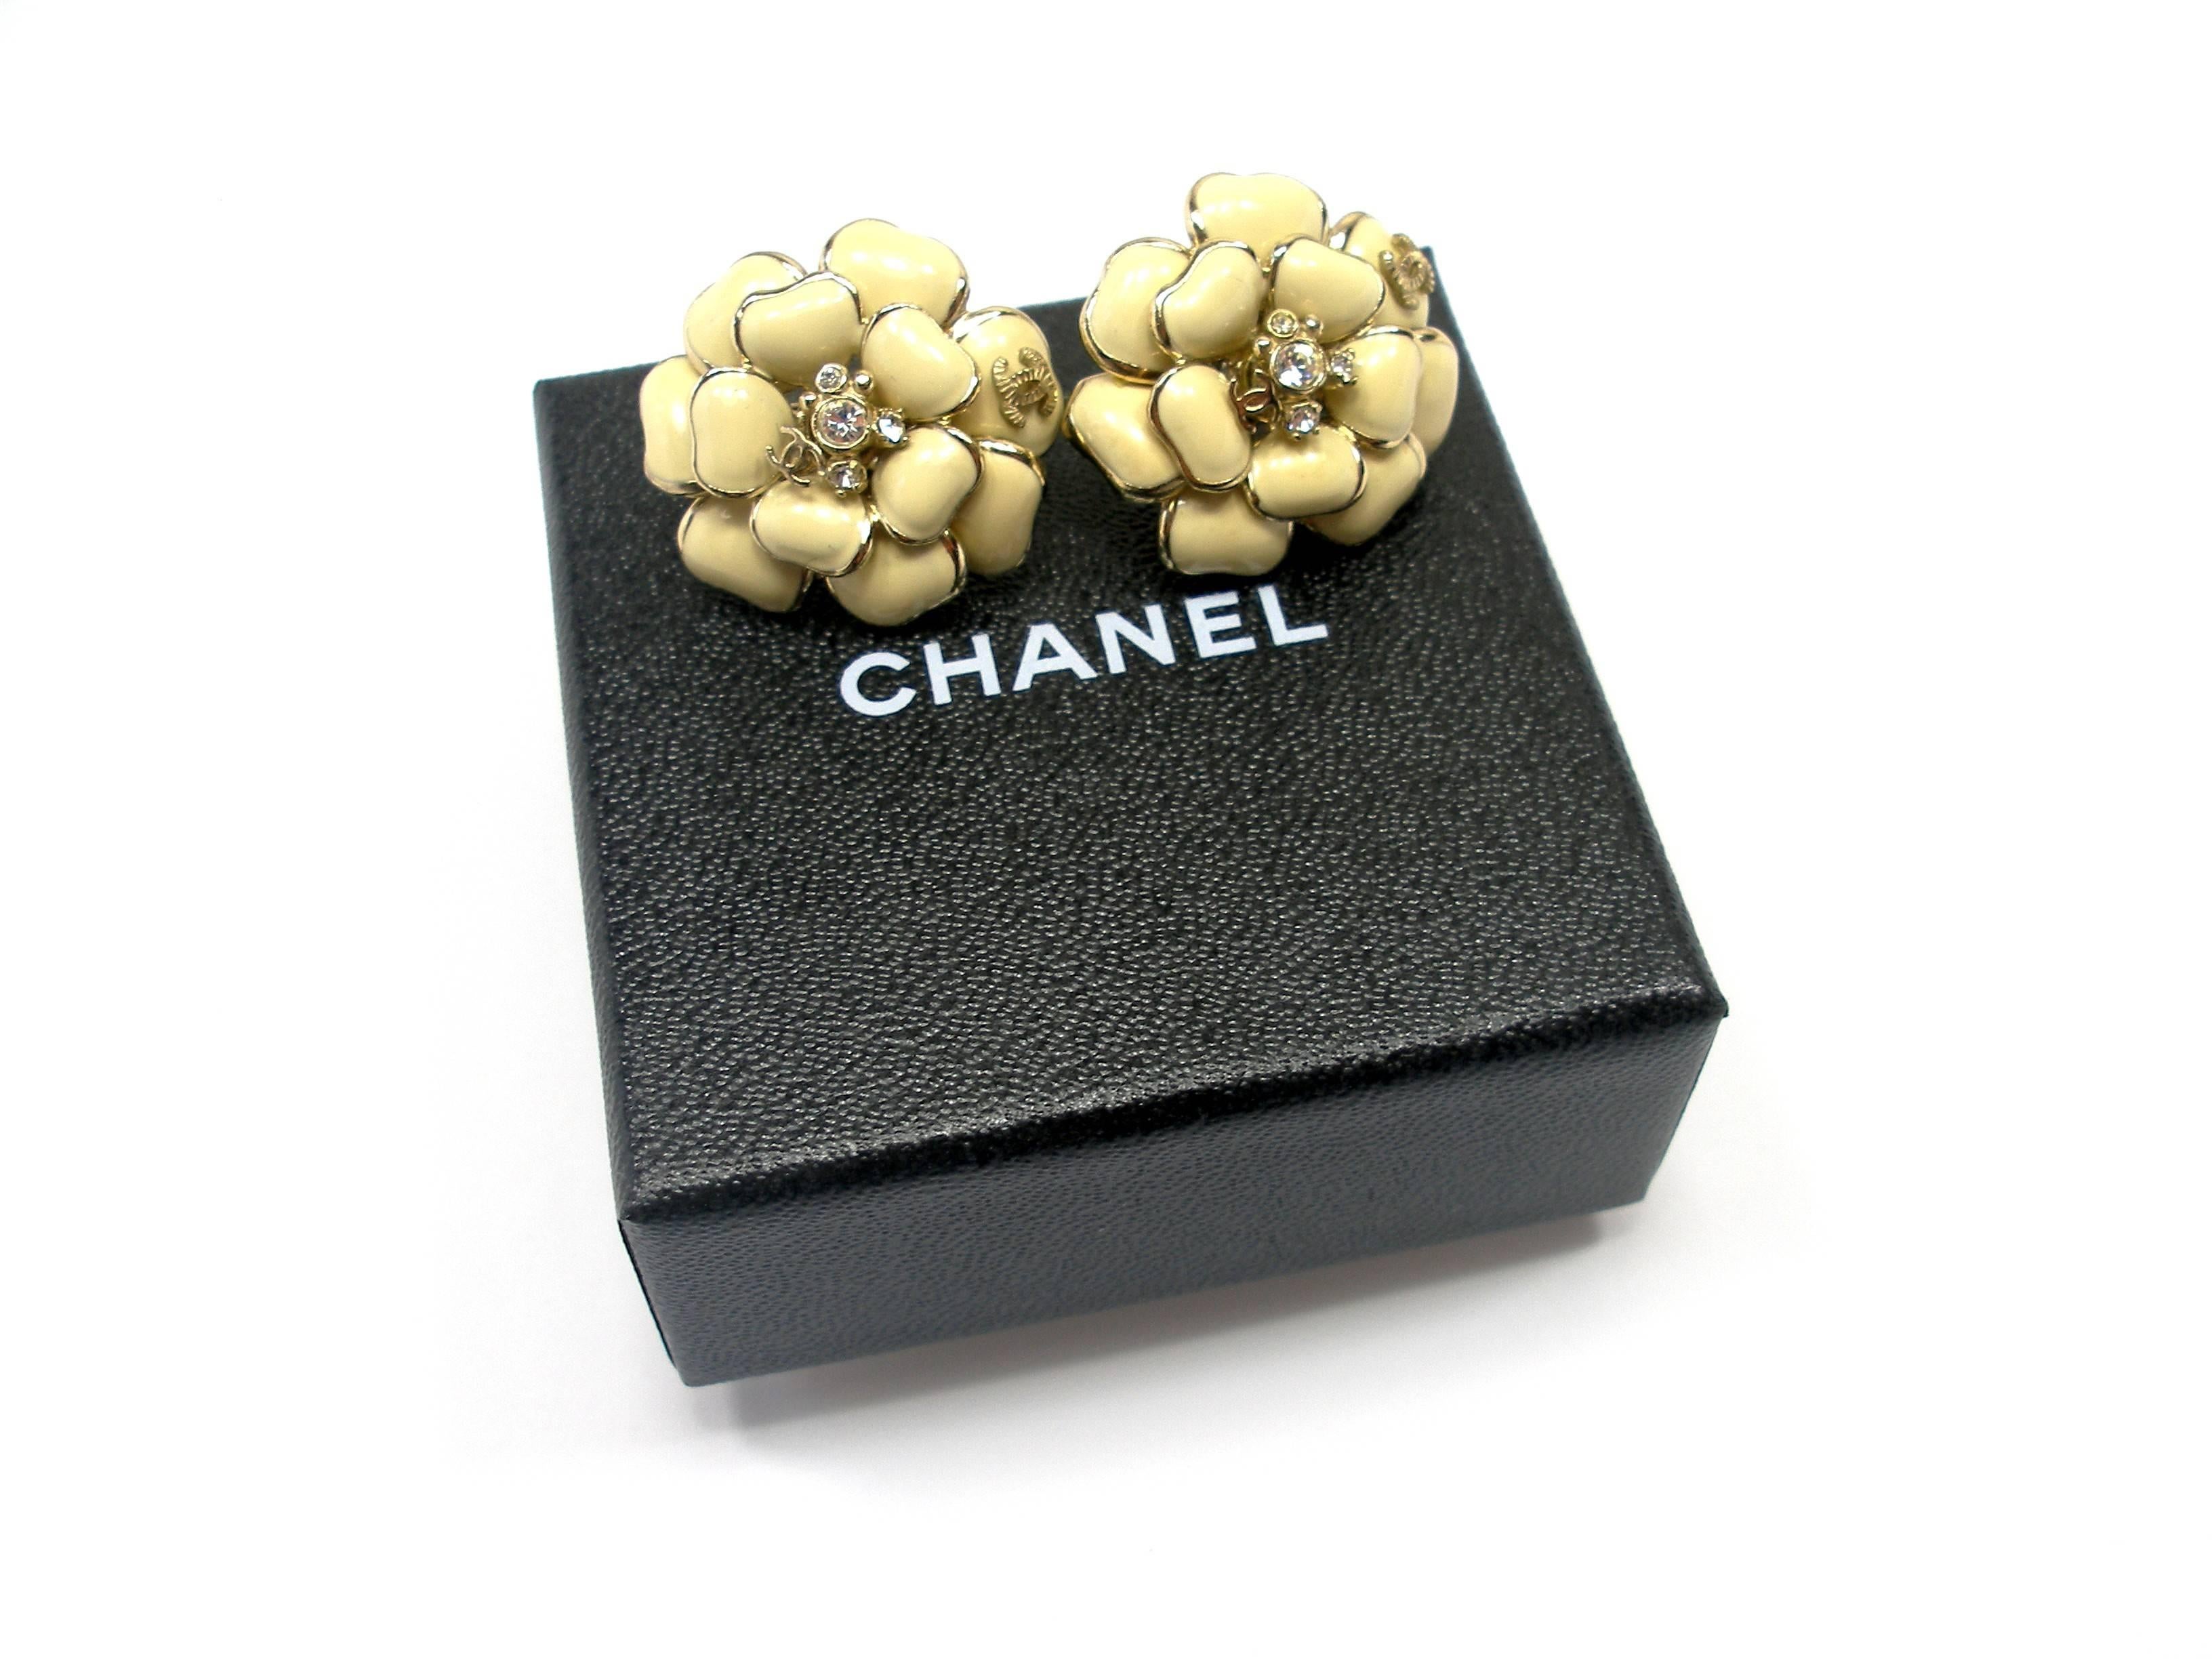 This beautiful Chanel earing set will make a grand addition to any fine jewelry collection!
Chanel Earrings in enamel with strass in gold métal .
Color : crème 
Signed at reverse 10CCA Chanel made in France 
Diameter : 2.6 cm 
its comes with Chanel